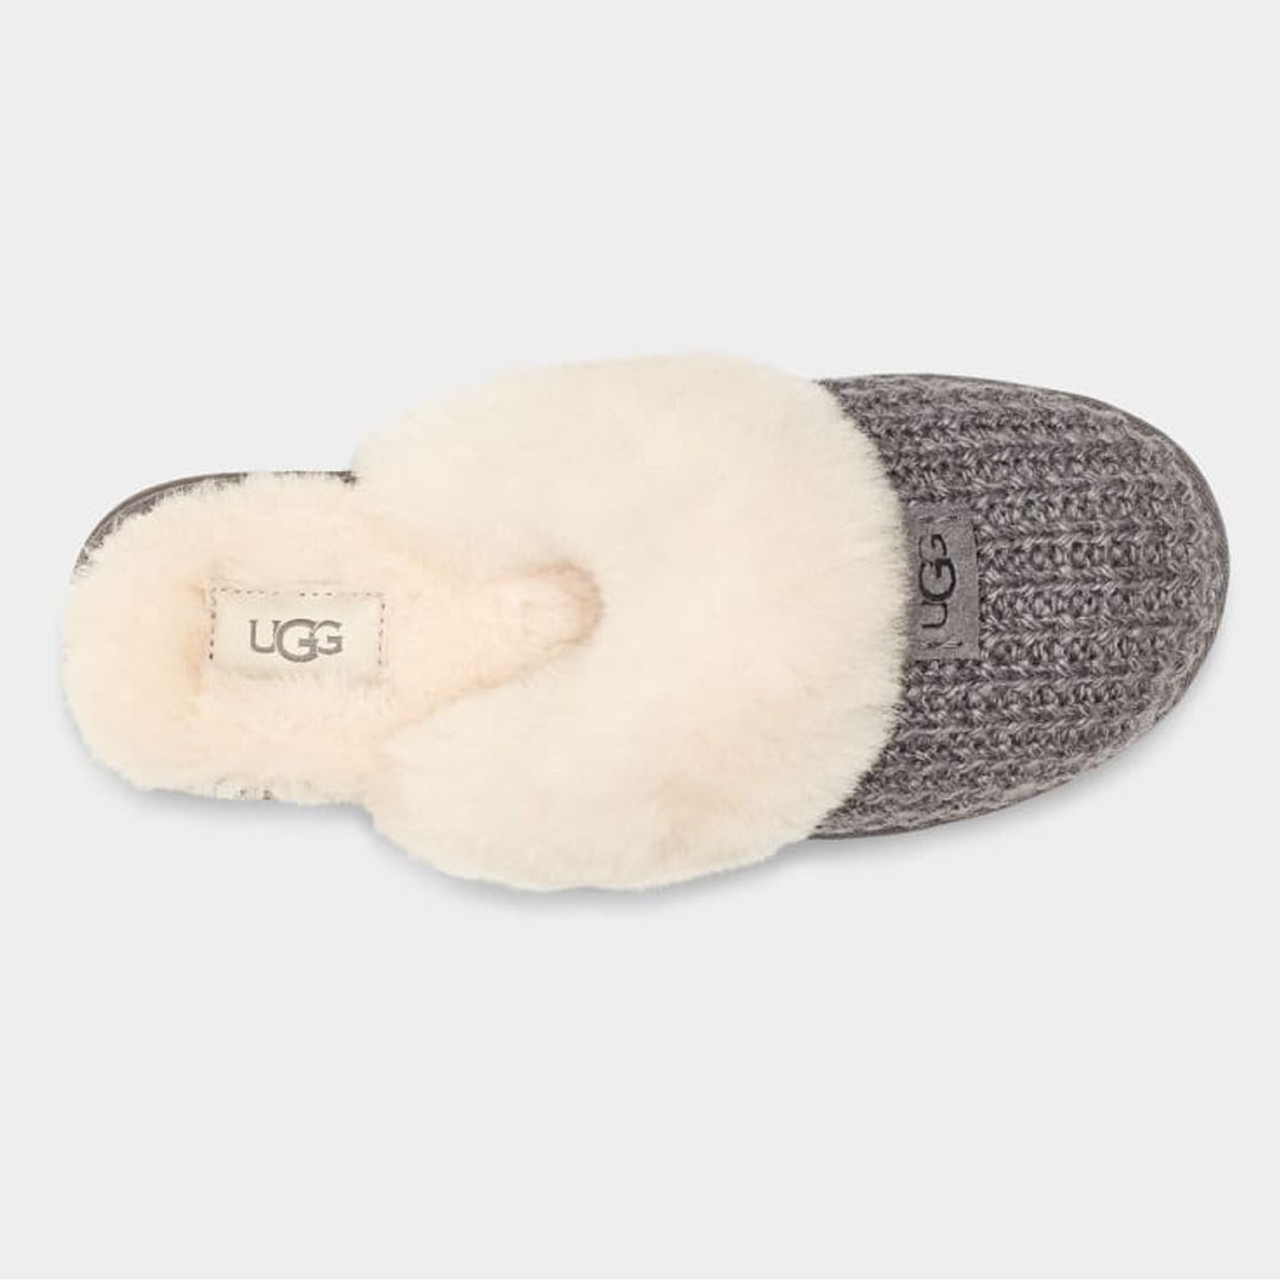 Ugg cozy slipper navy blue size 7 | Slippers cozy, Uggs, Slippers